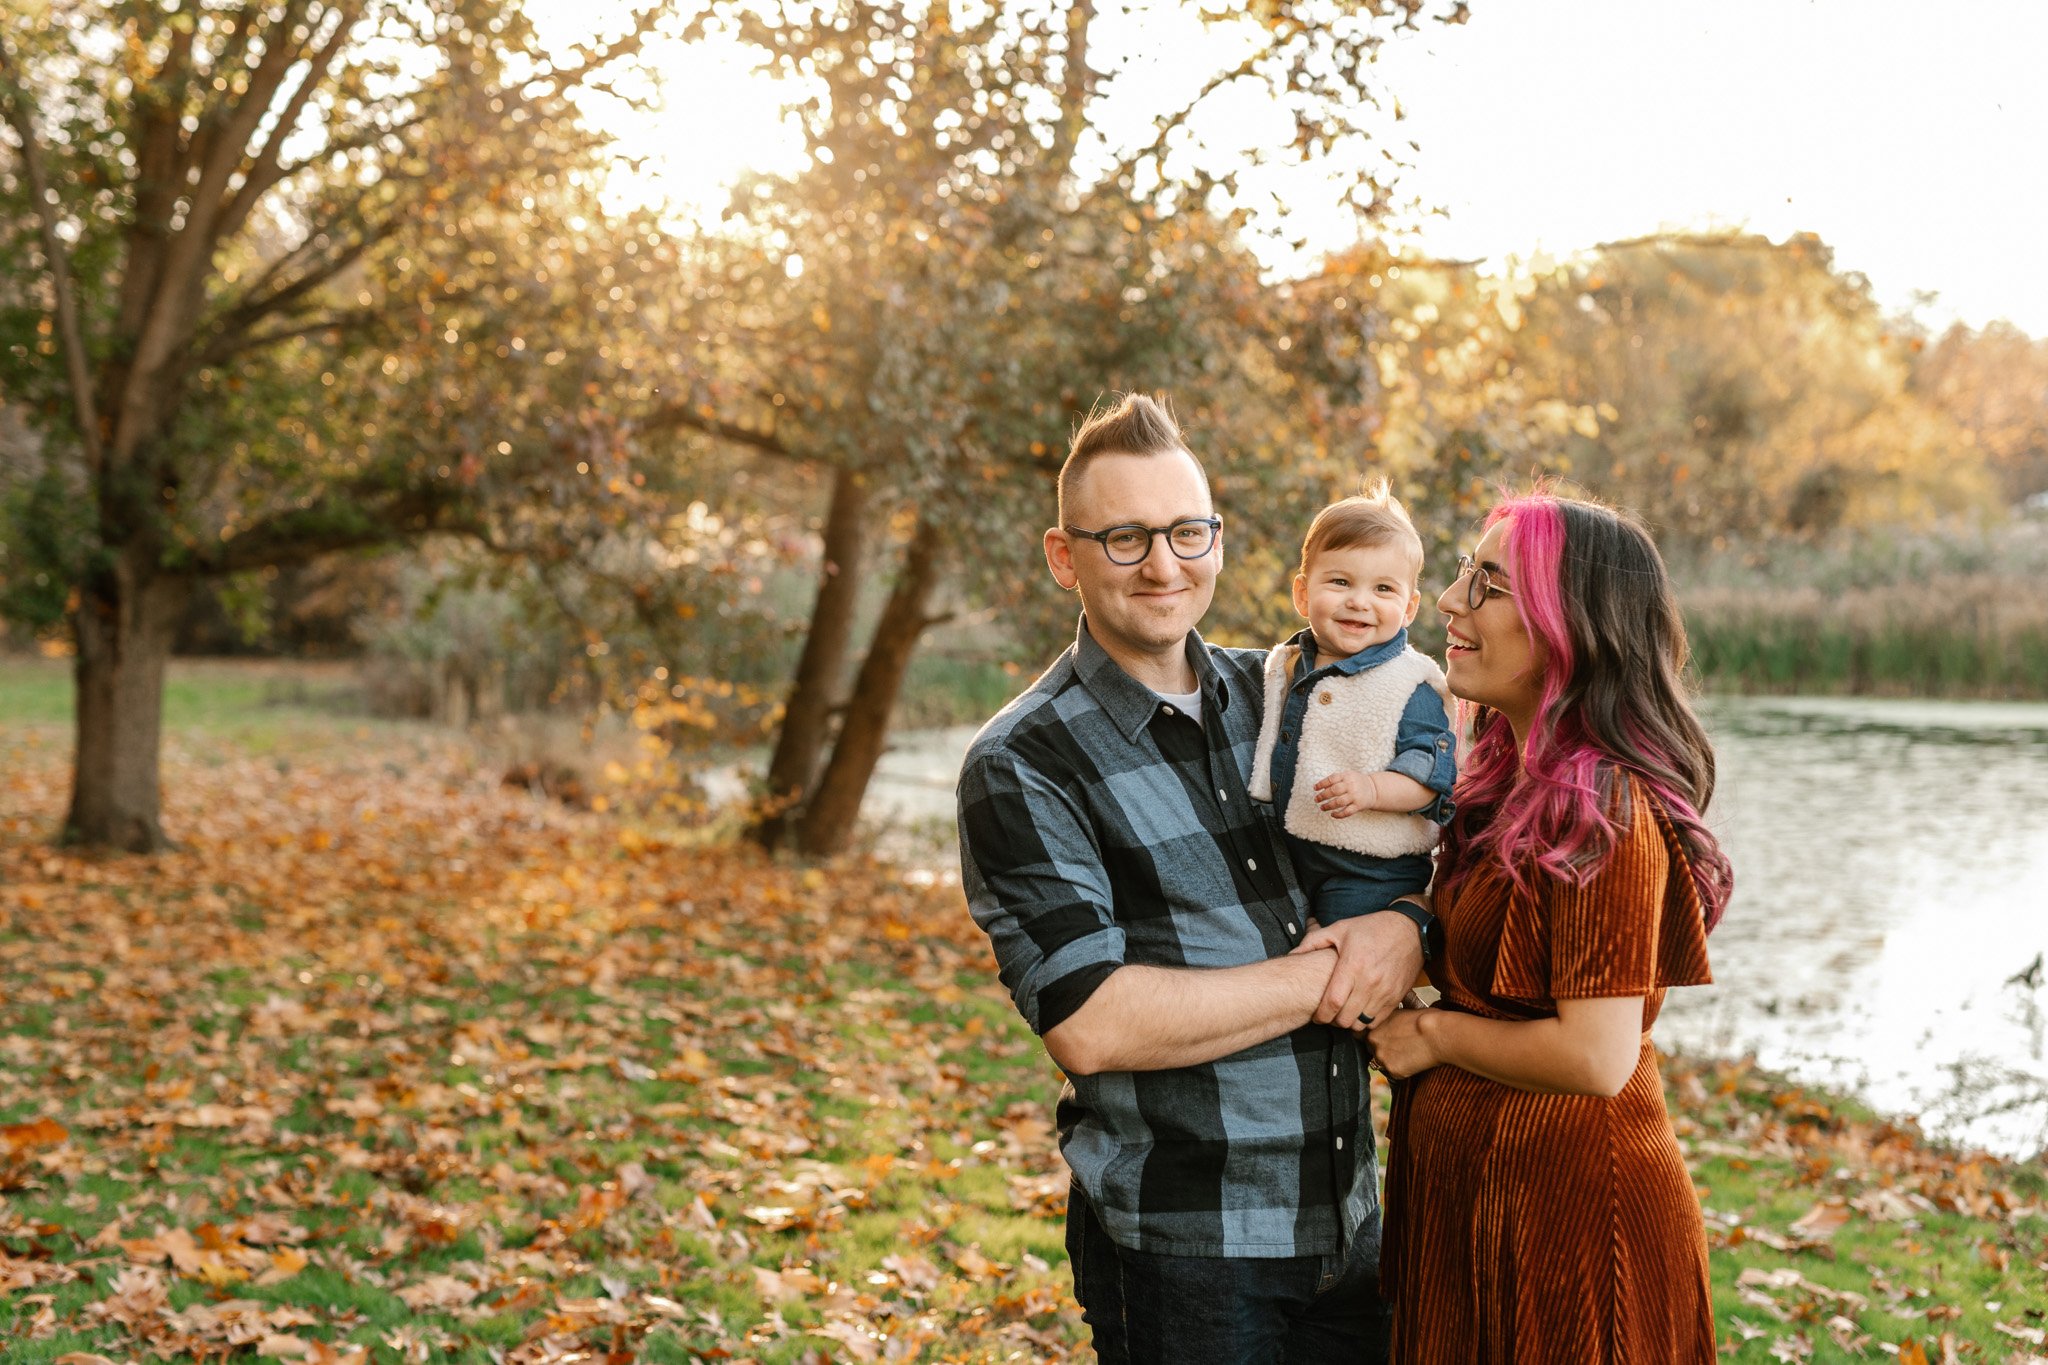  The family portrait was taken next to a river in the New Jersey fall time by Nicole Hawkins Photography. fall family style #NicoleHawkinsPhotography #NicoleHawkinsFamily #fallfamilyphotos #fallphotos #familyphotographerNJ #NJfallfamilypics 